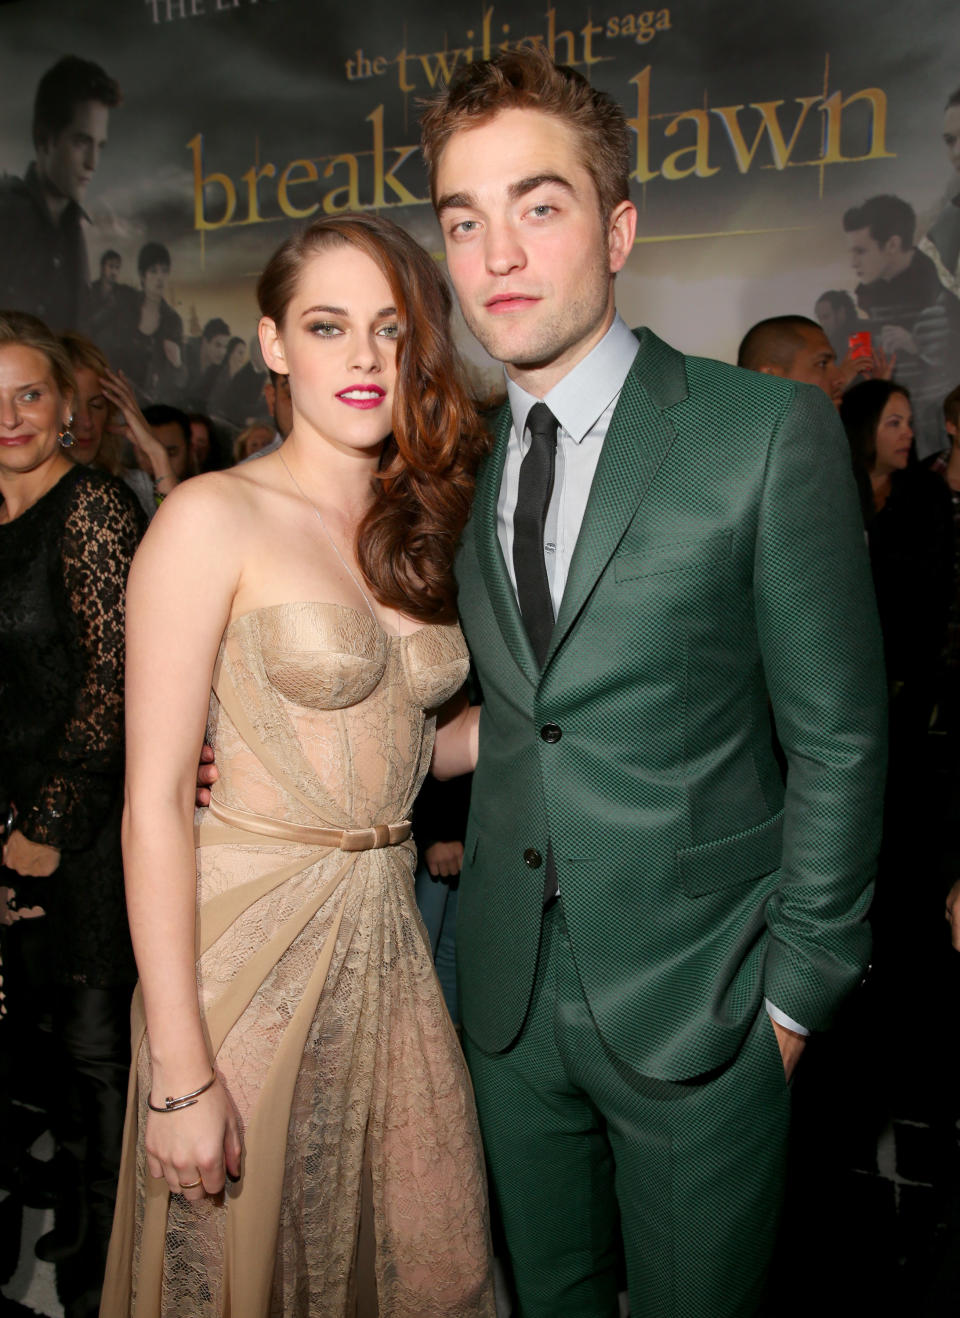 Stewart and Pattinson in 2012 at the premiere of <i>The Twilight Saga: Breaking Dawn – Part 2</i> in L.A. (Photo: Christopher Polk/Getty Images)